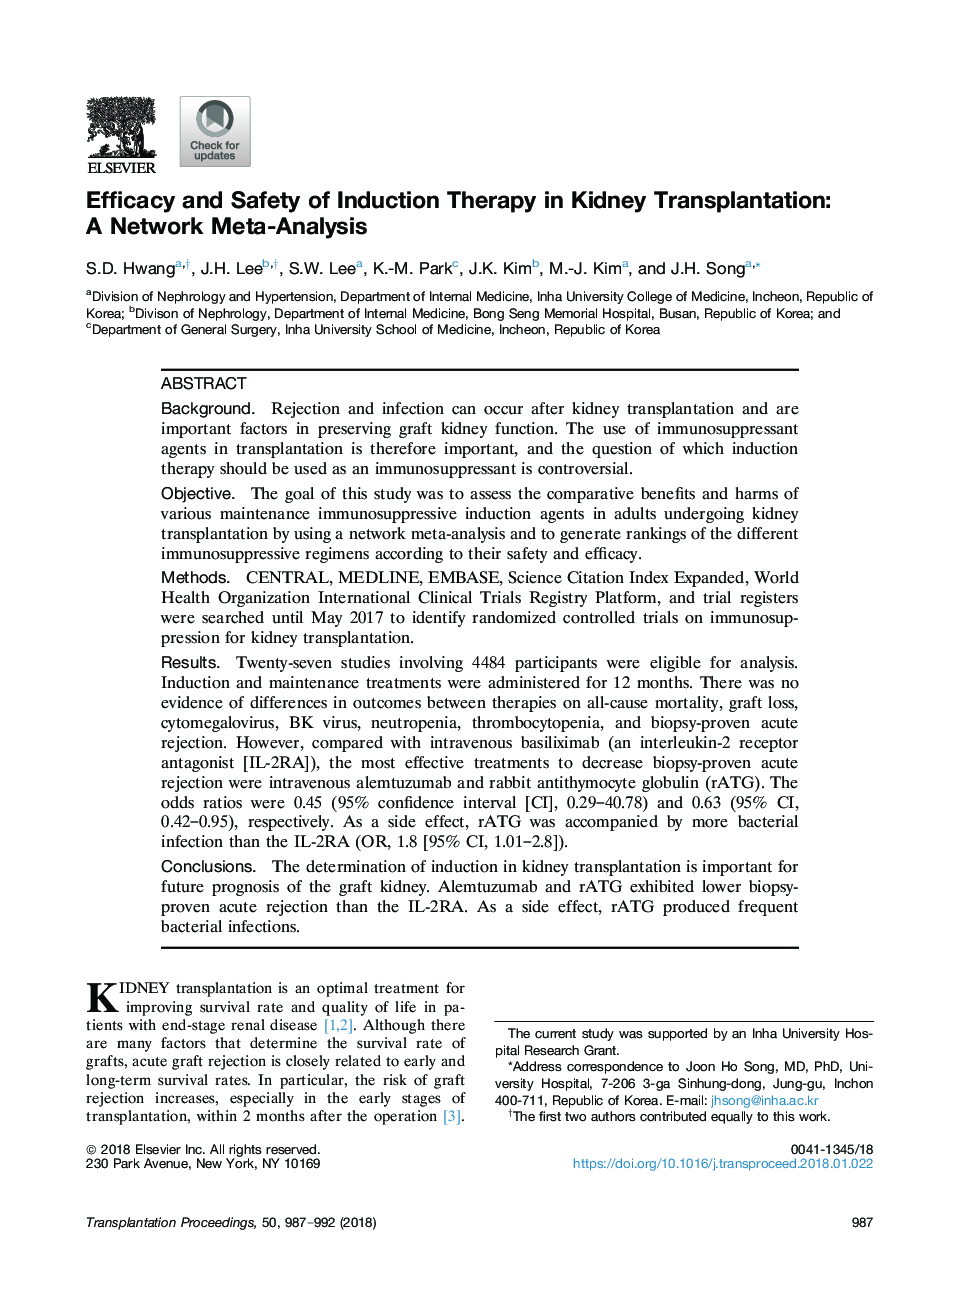 Efficacy and Safety of Induction Therapy in Kidney Transplantation: A Network Meta-Analysis